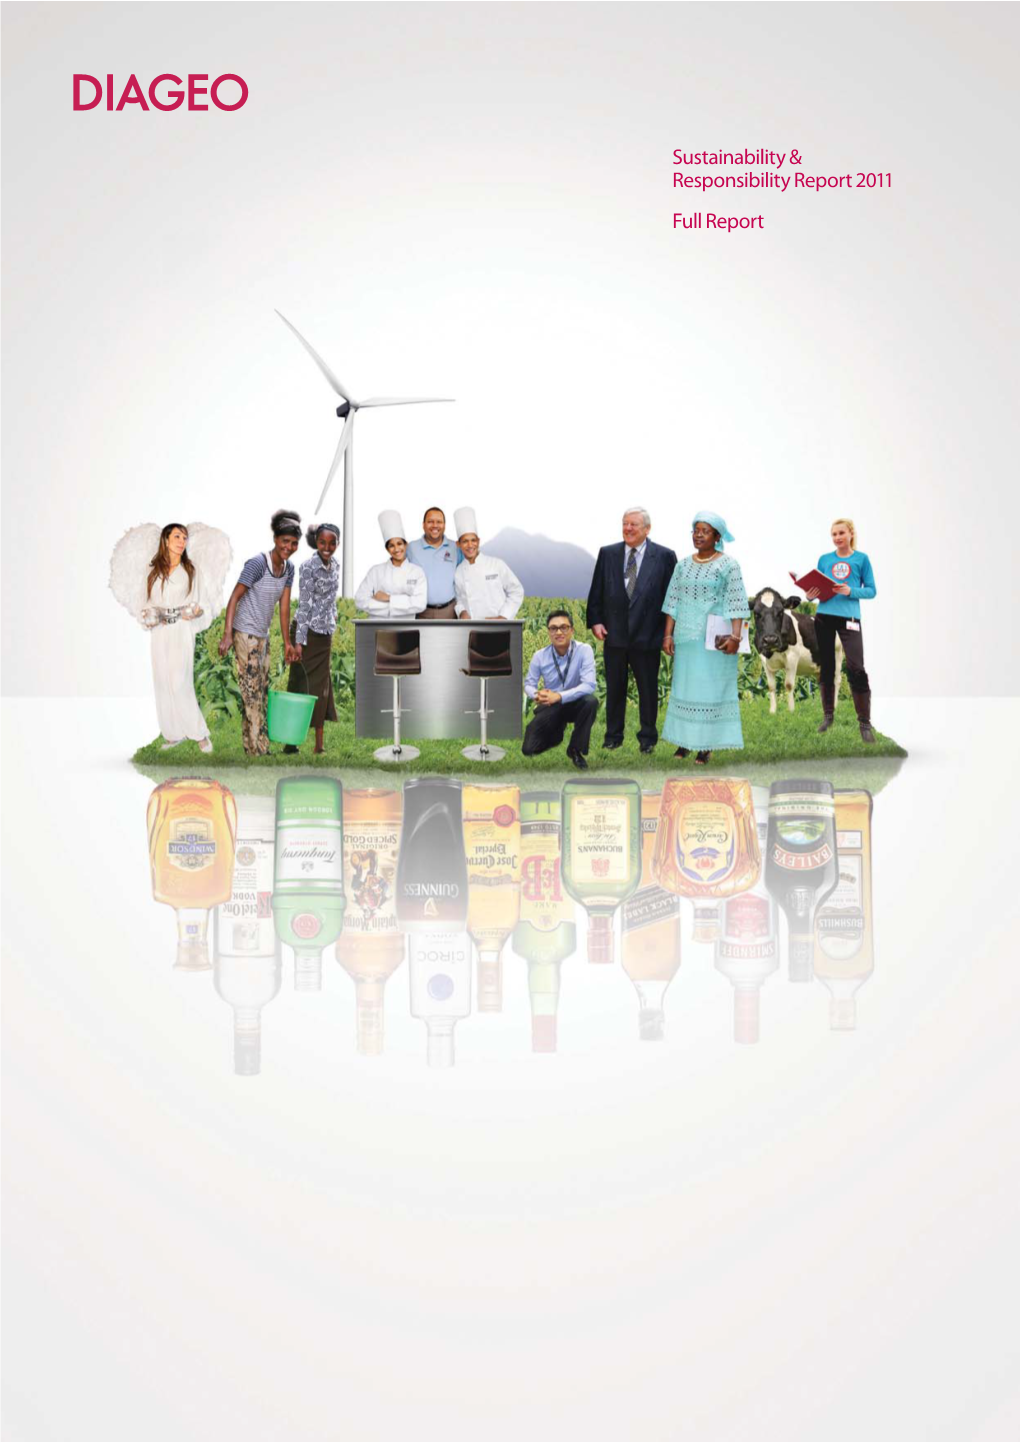 Sustainability & Responsibility Report 2011 Full Report